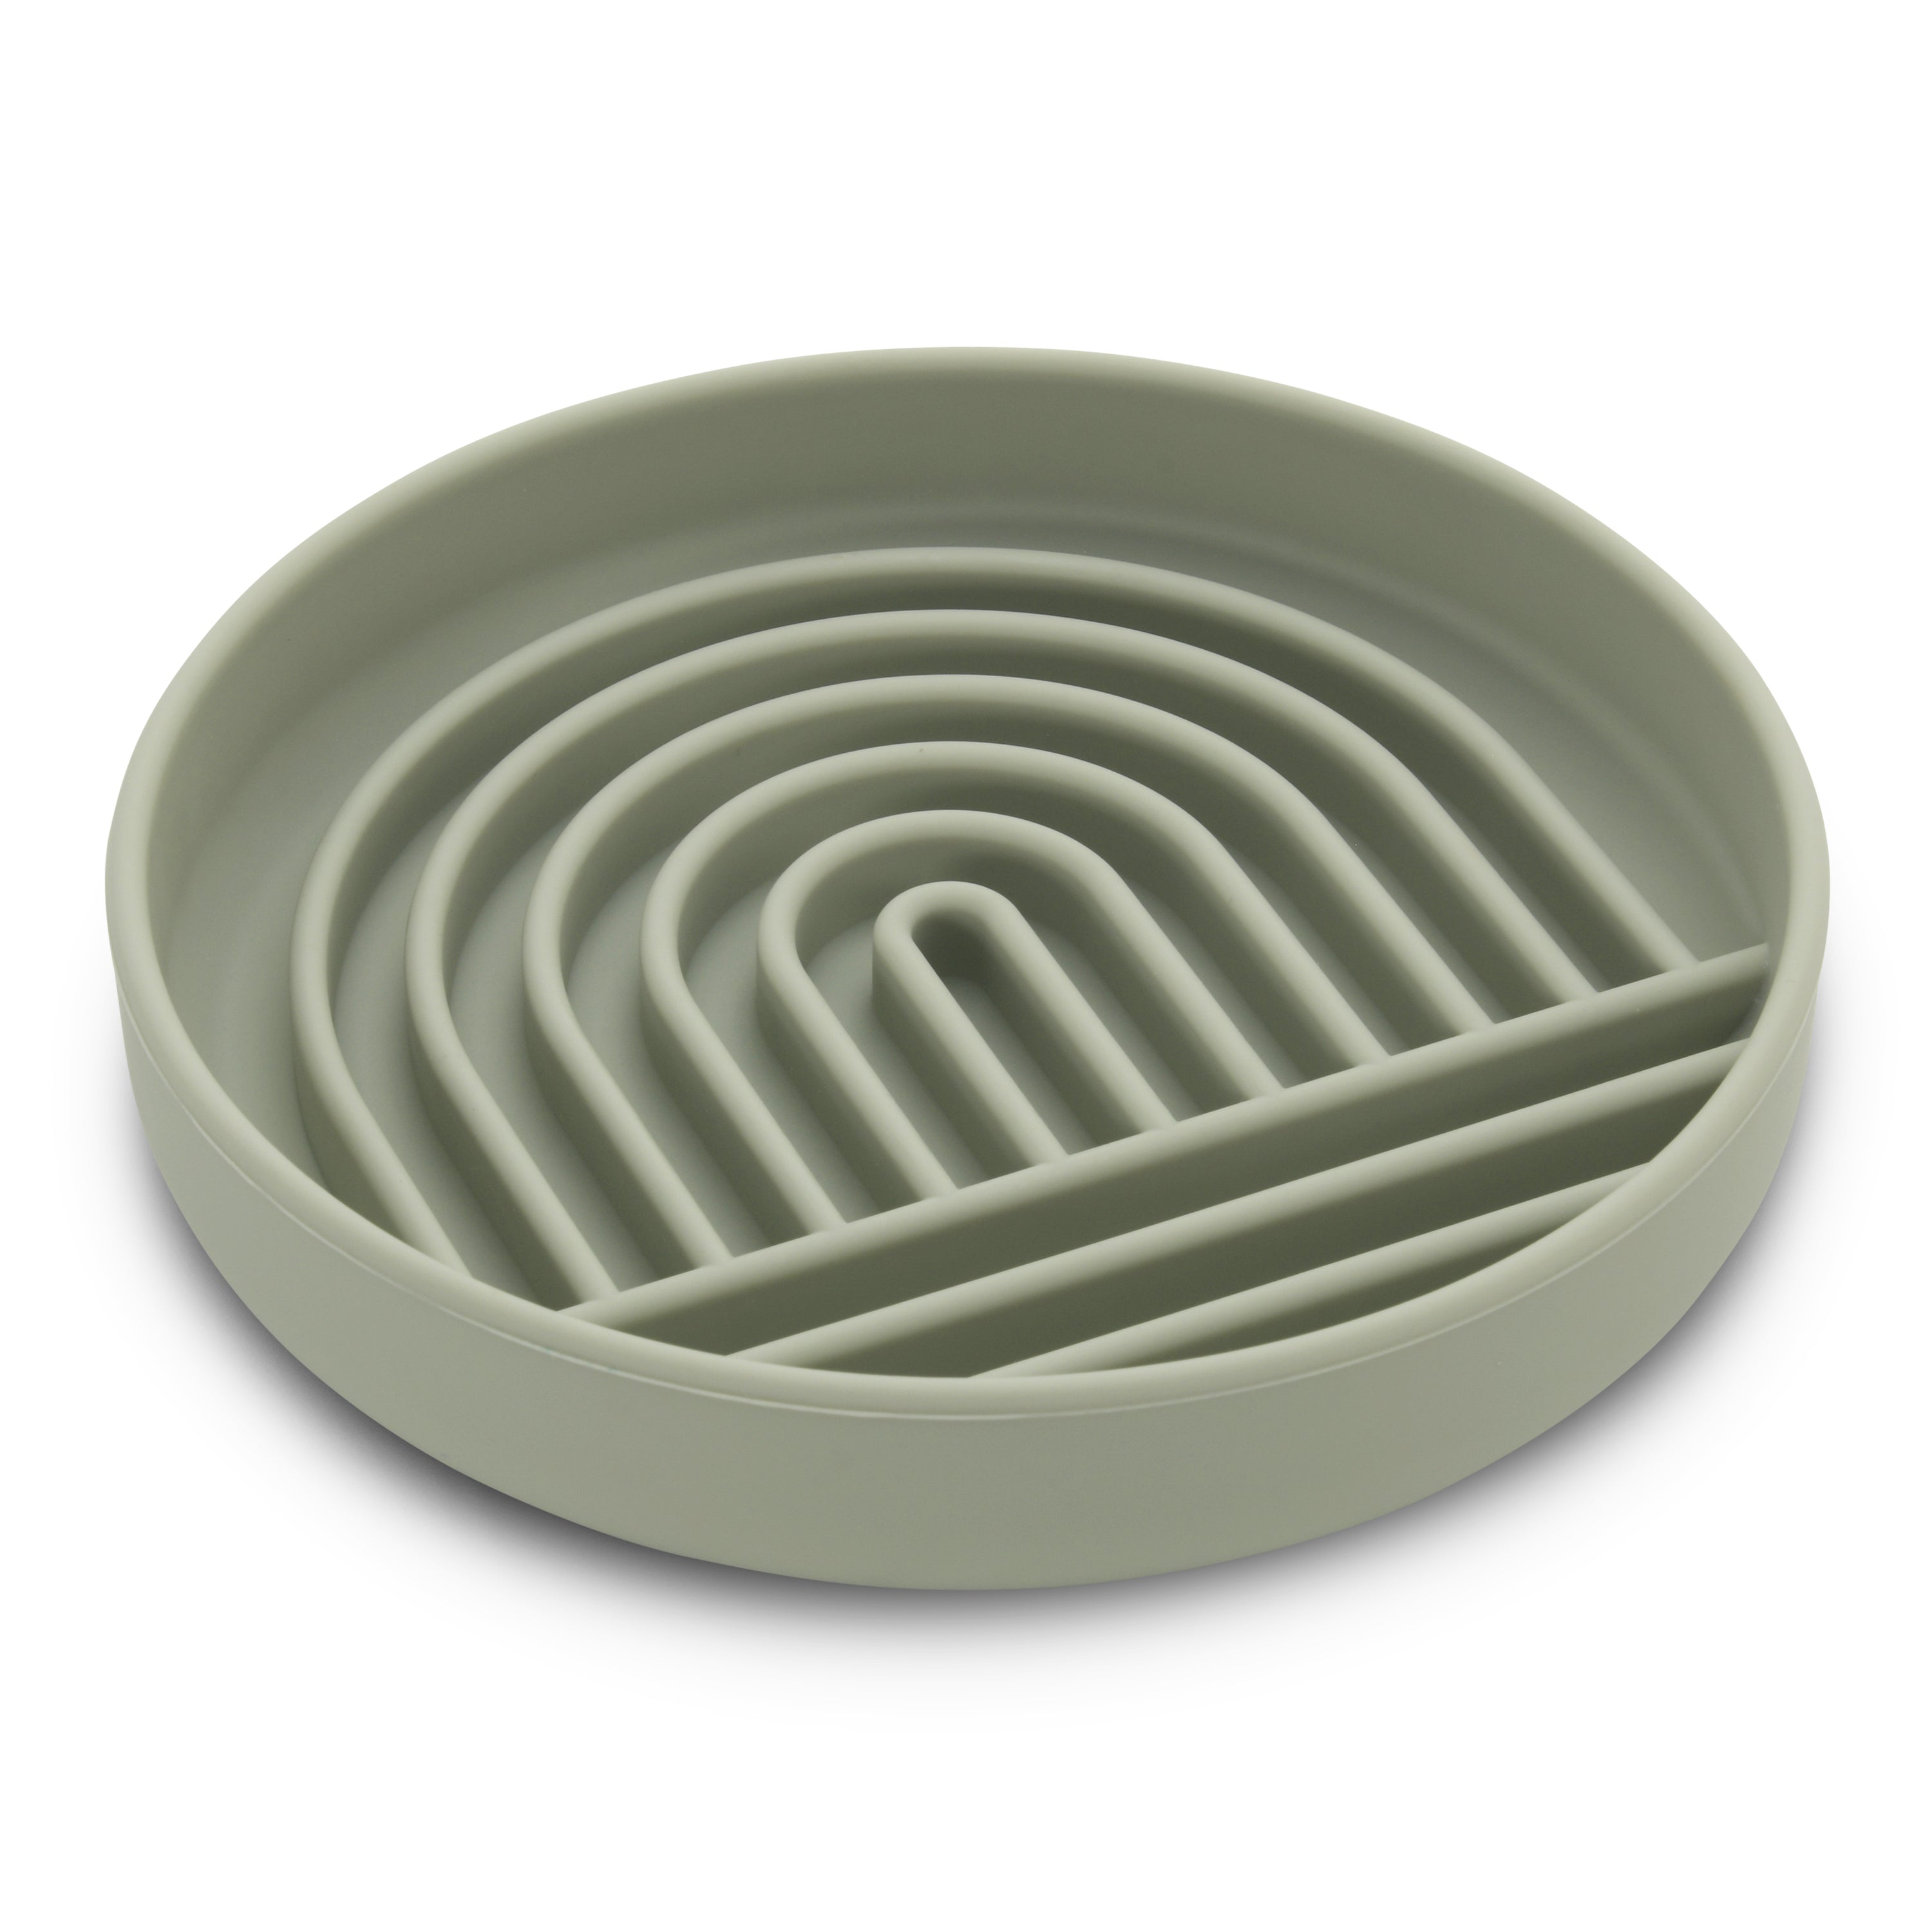 Zilly Slow Feeder Dog Food Mat, Lick Mat for Medium Large Dogs - Slow Feeder Bowl, (Mint Green)